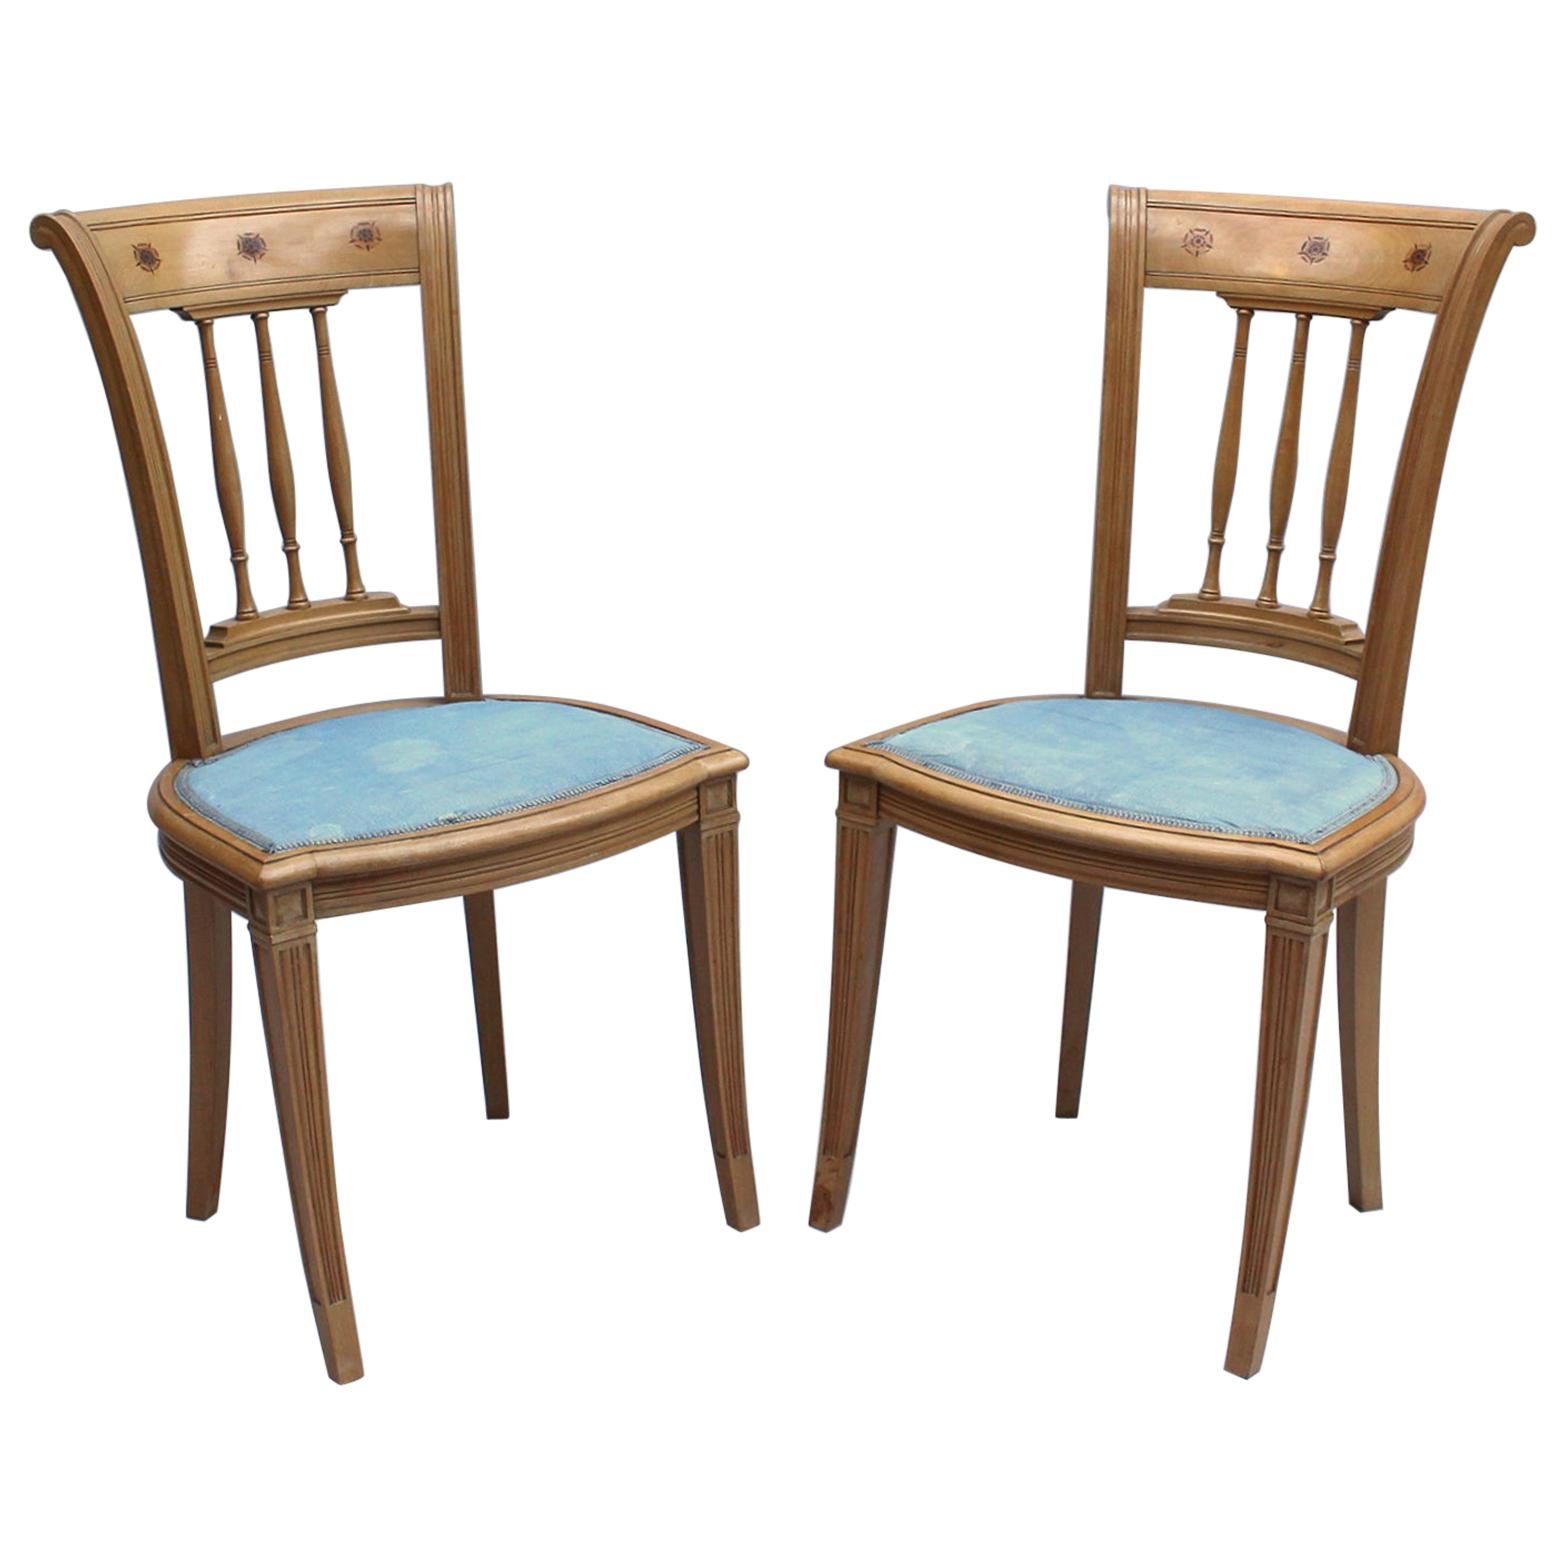 2 Fine French Art Deco Chairs by R. Damon & Bertaux For Sale